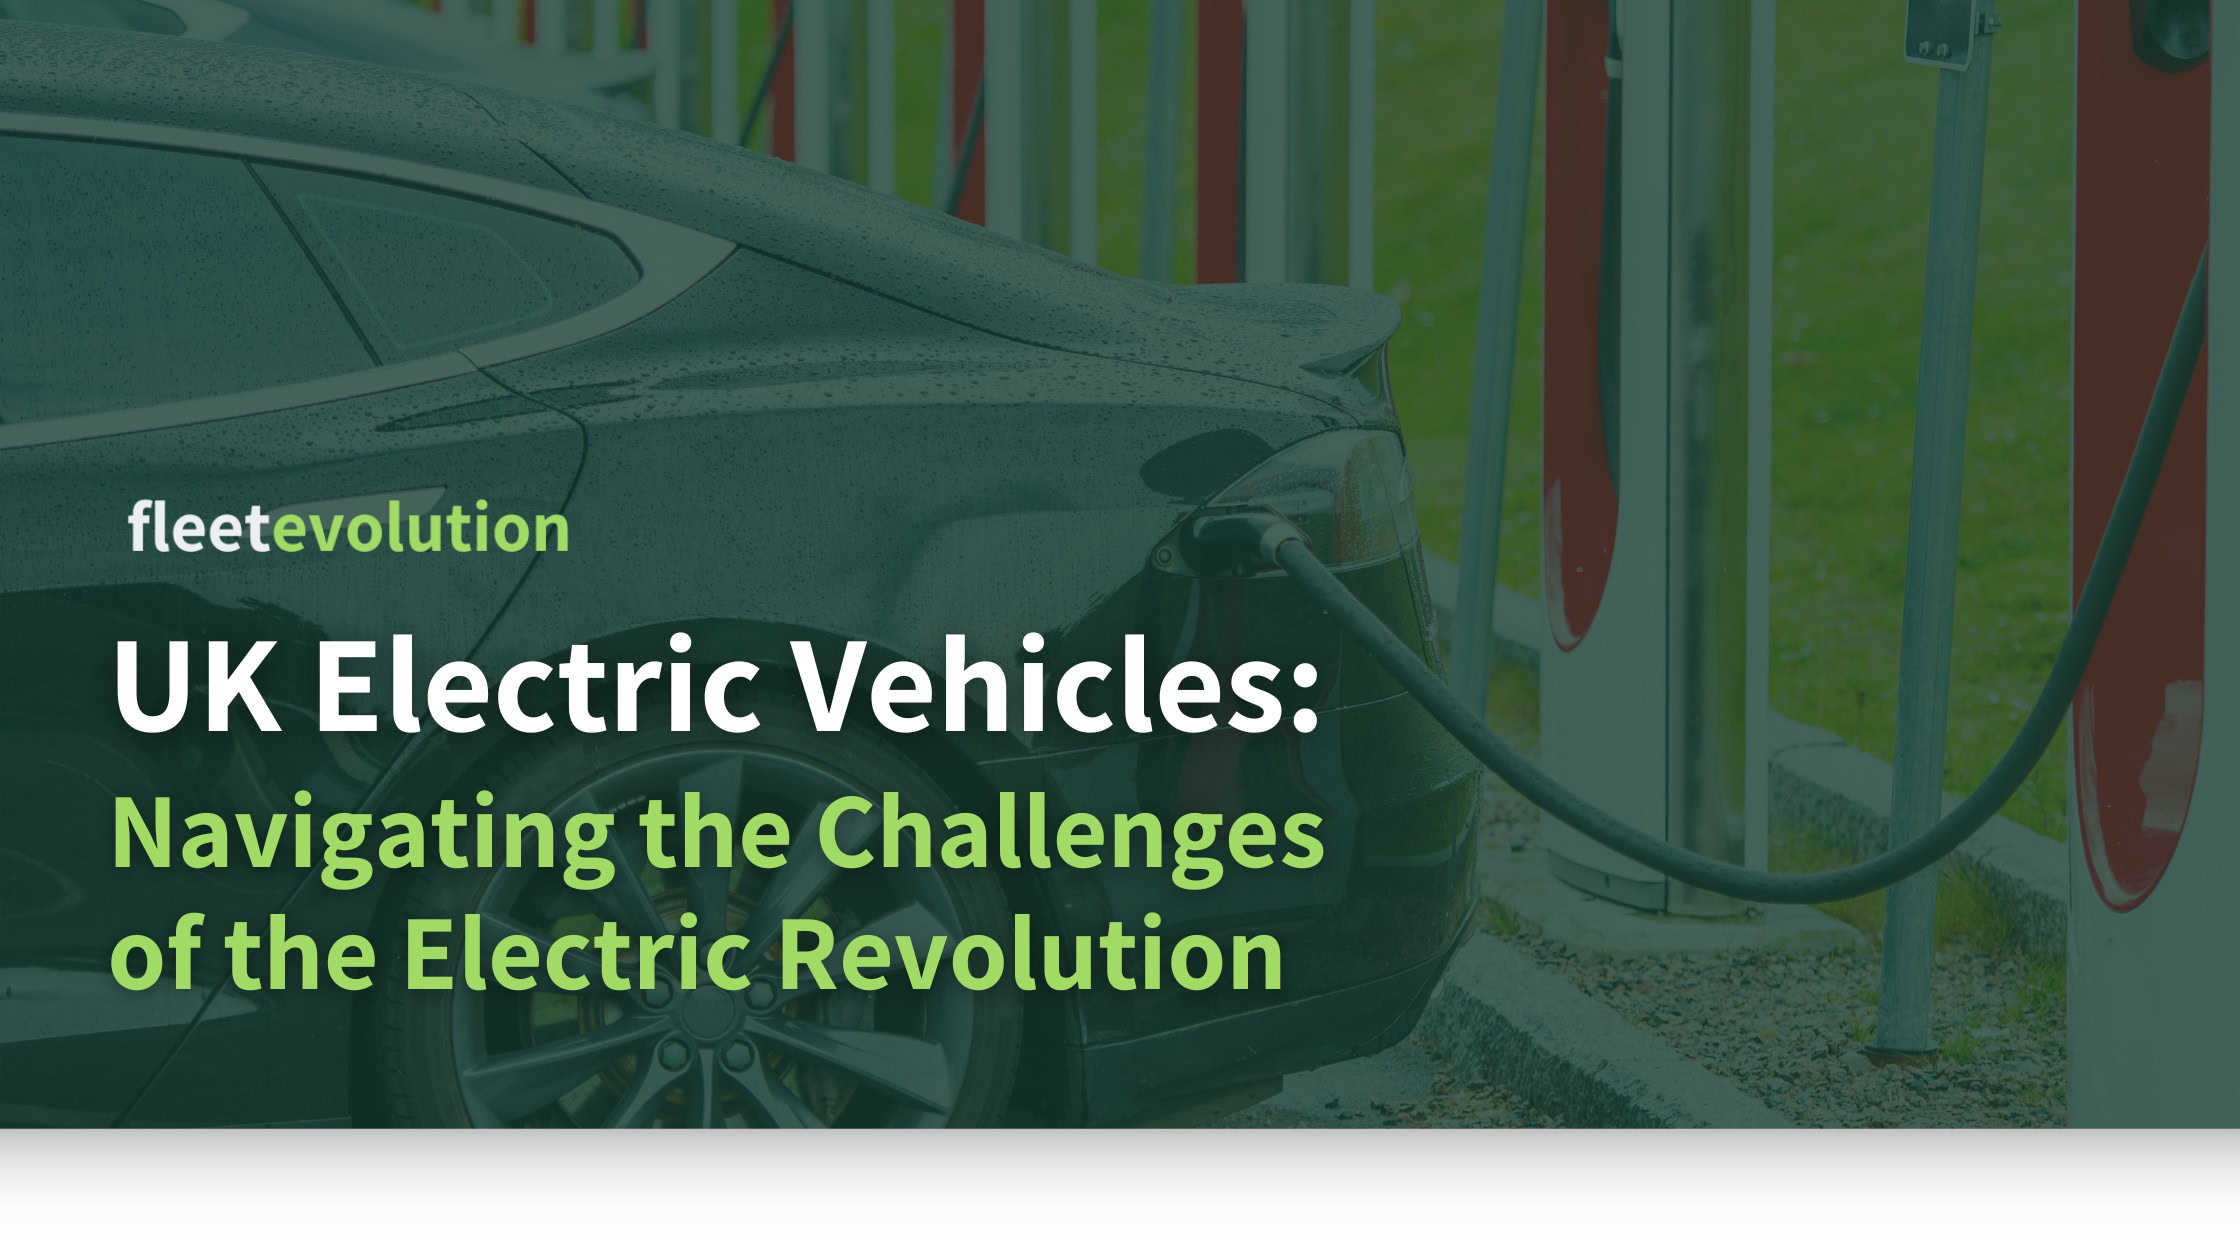 UK Electric Vehicles: Navigating the Challenges of the Electric Revolution